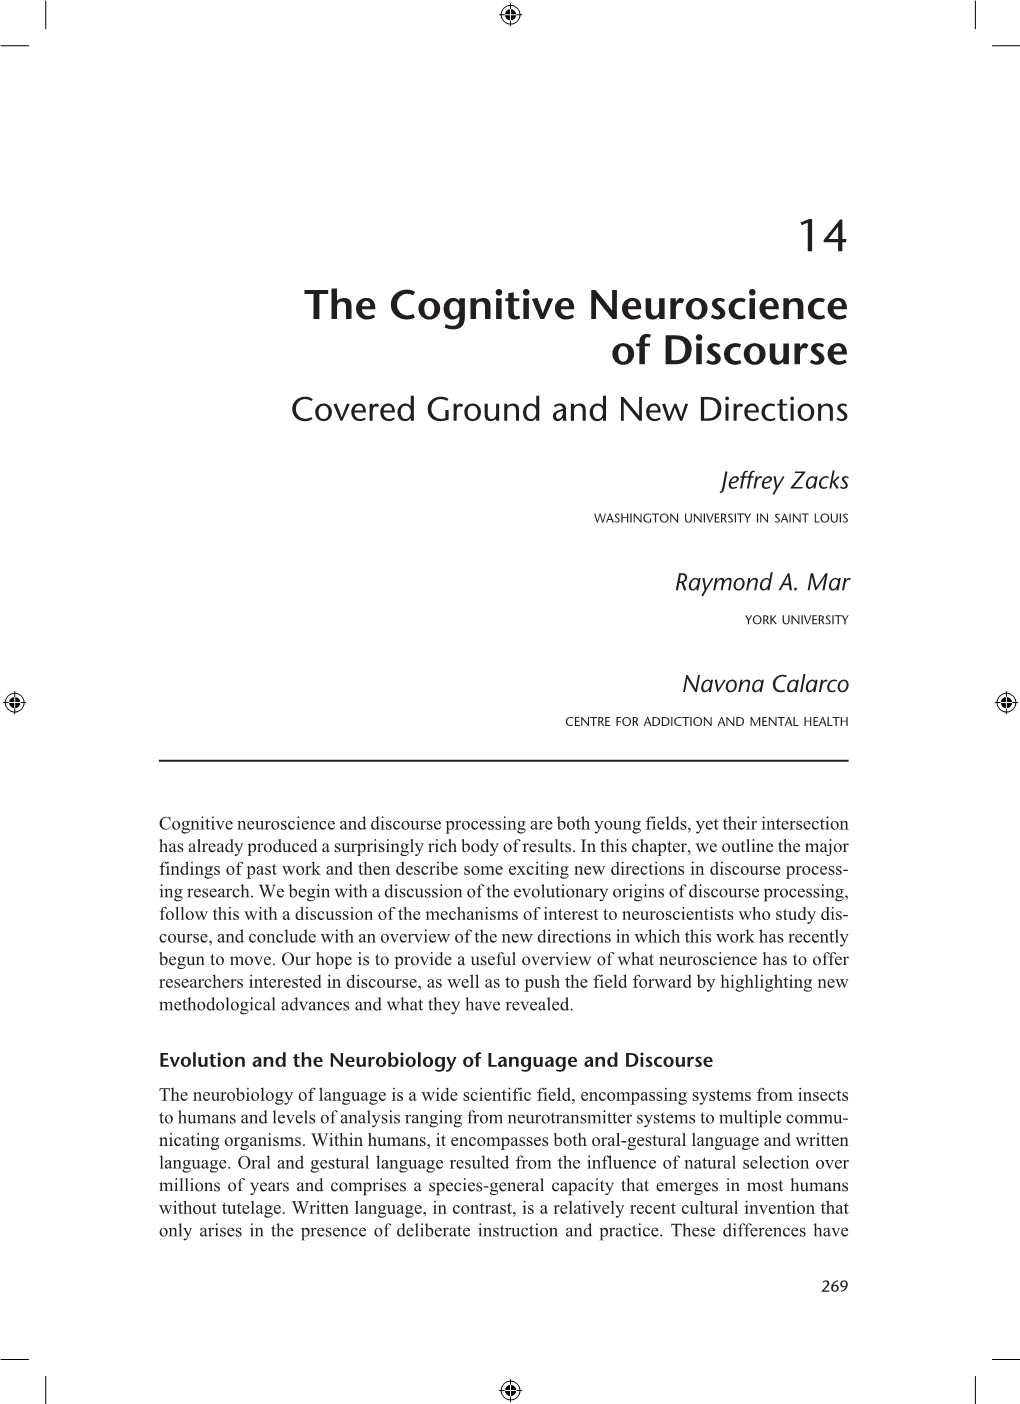 The Cognitive Neuroscience of Discourse Covered Ground and New Directions